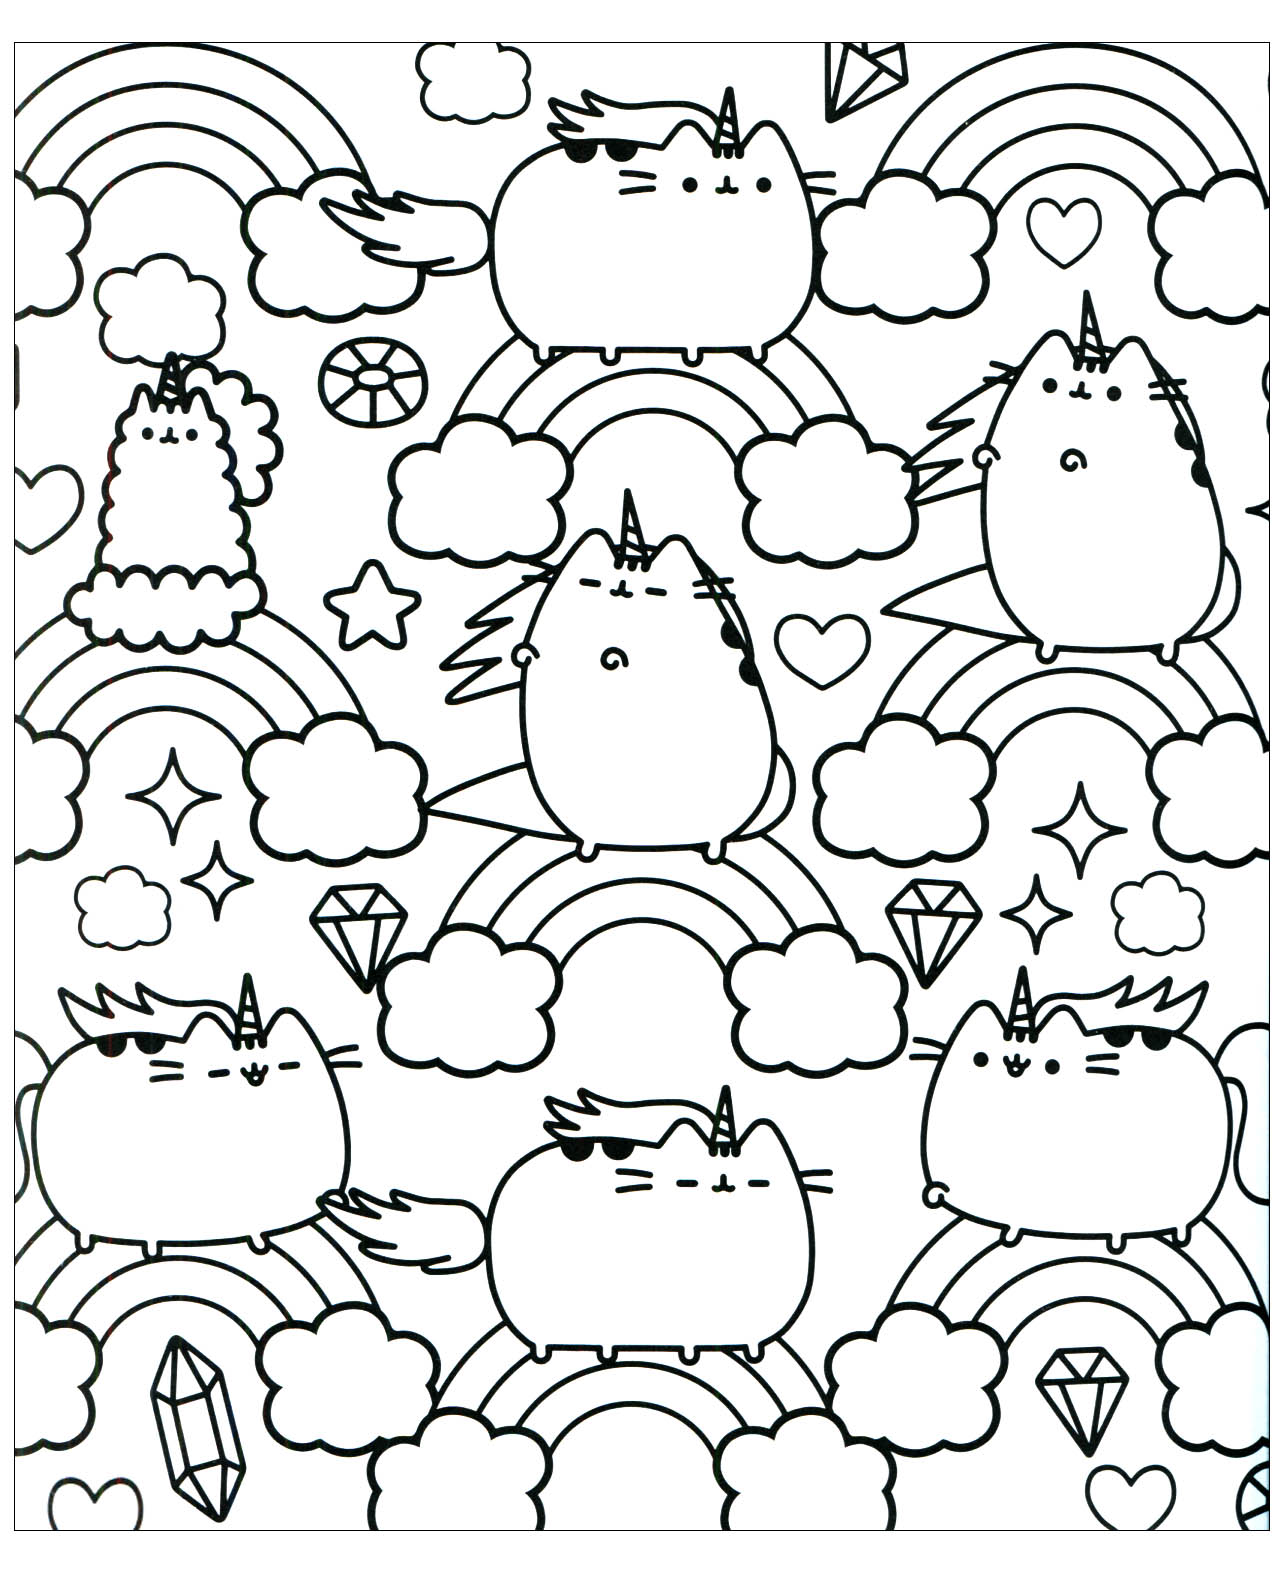 Pusheen Cat Unicorn Coloring Page Coloring Pages